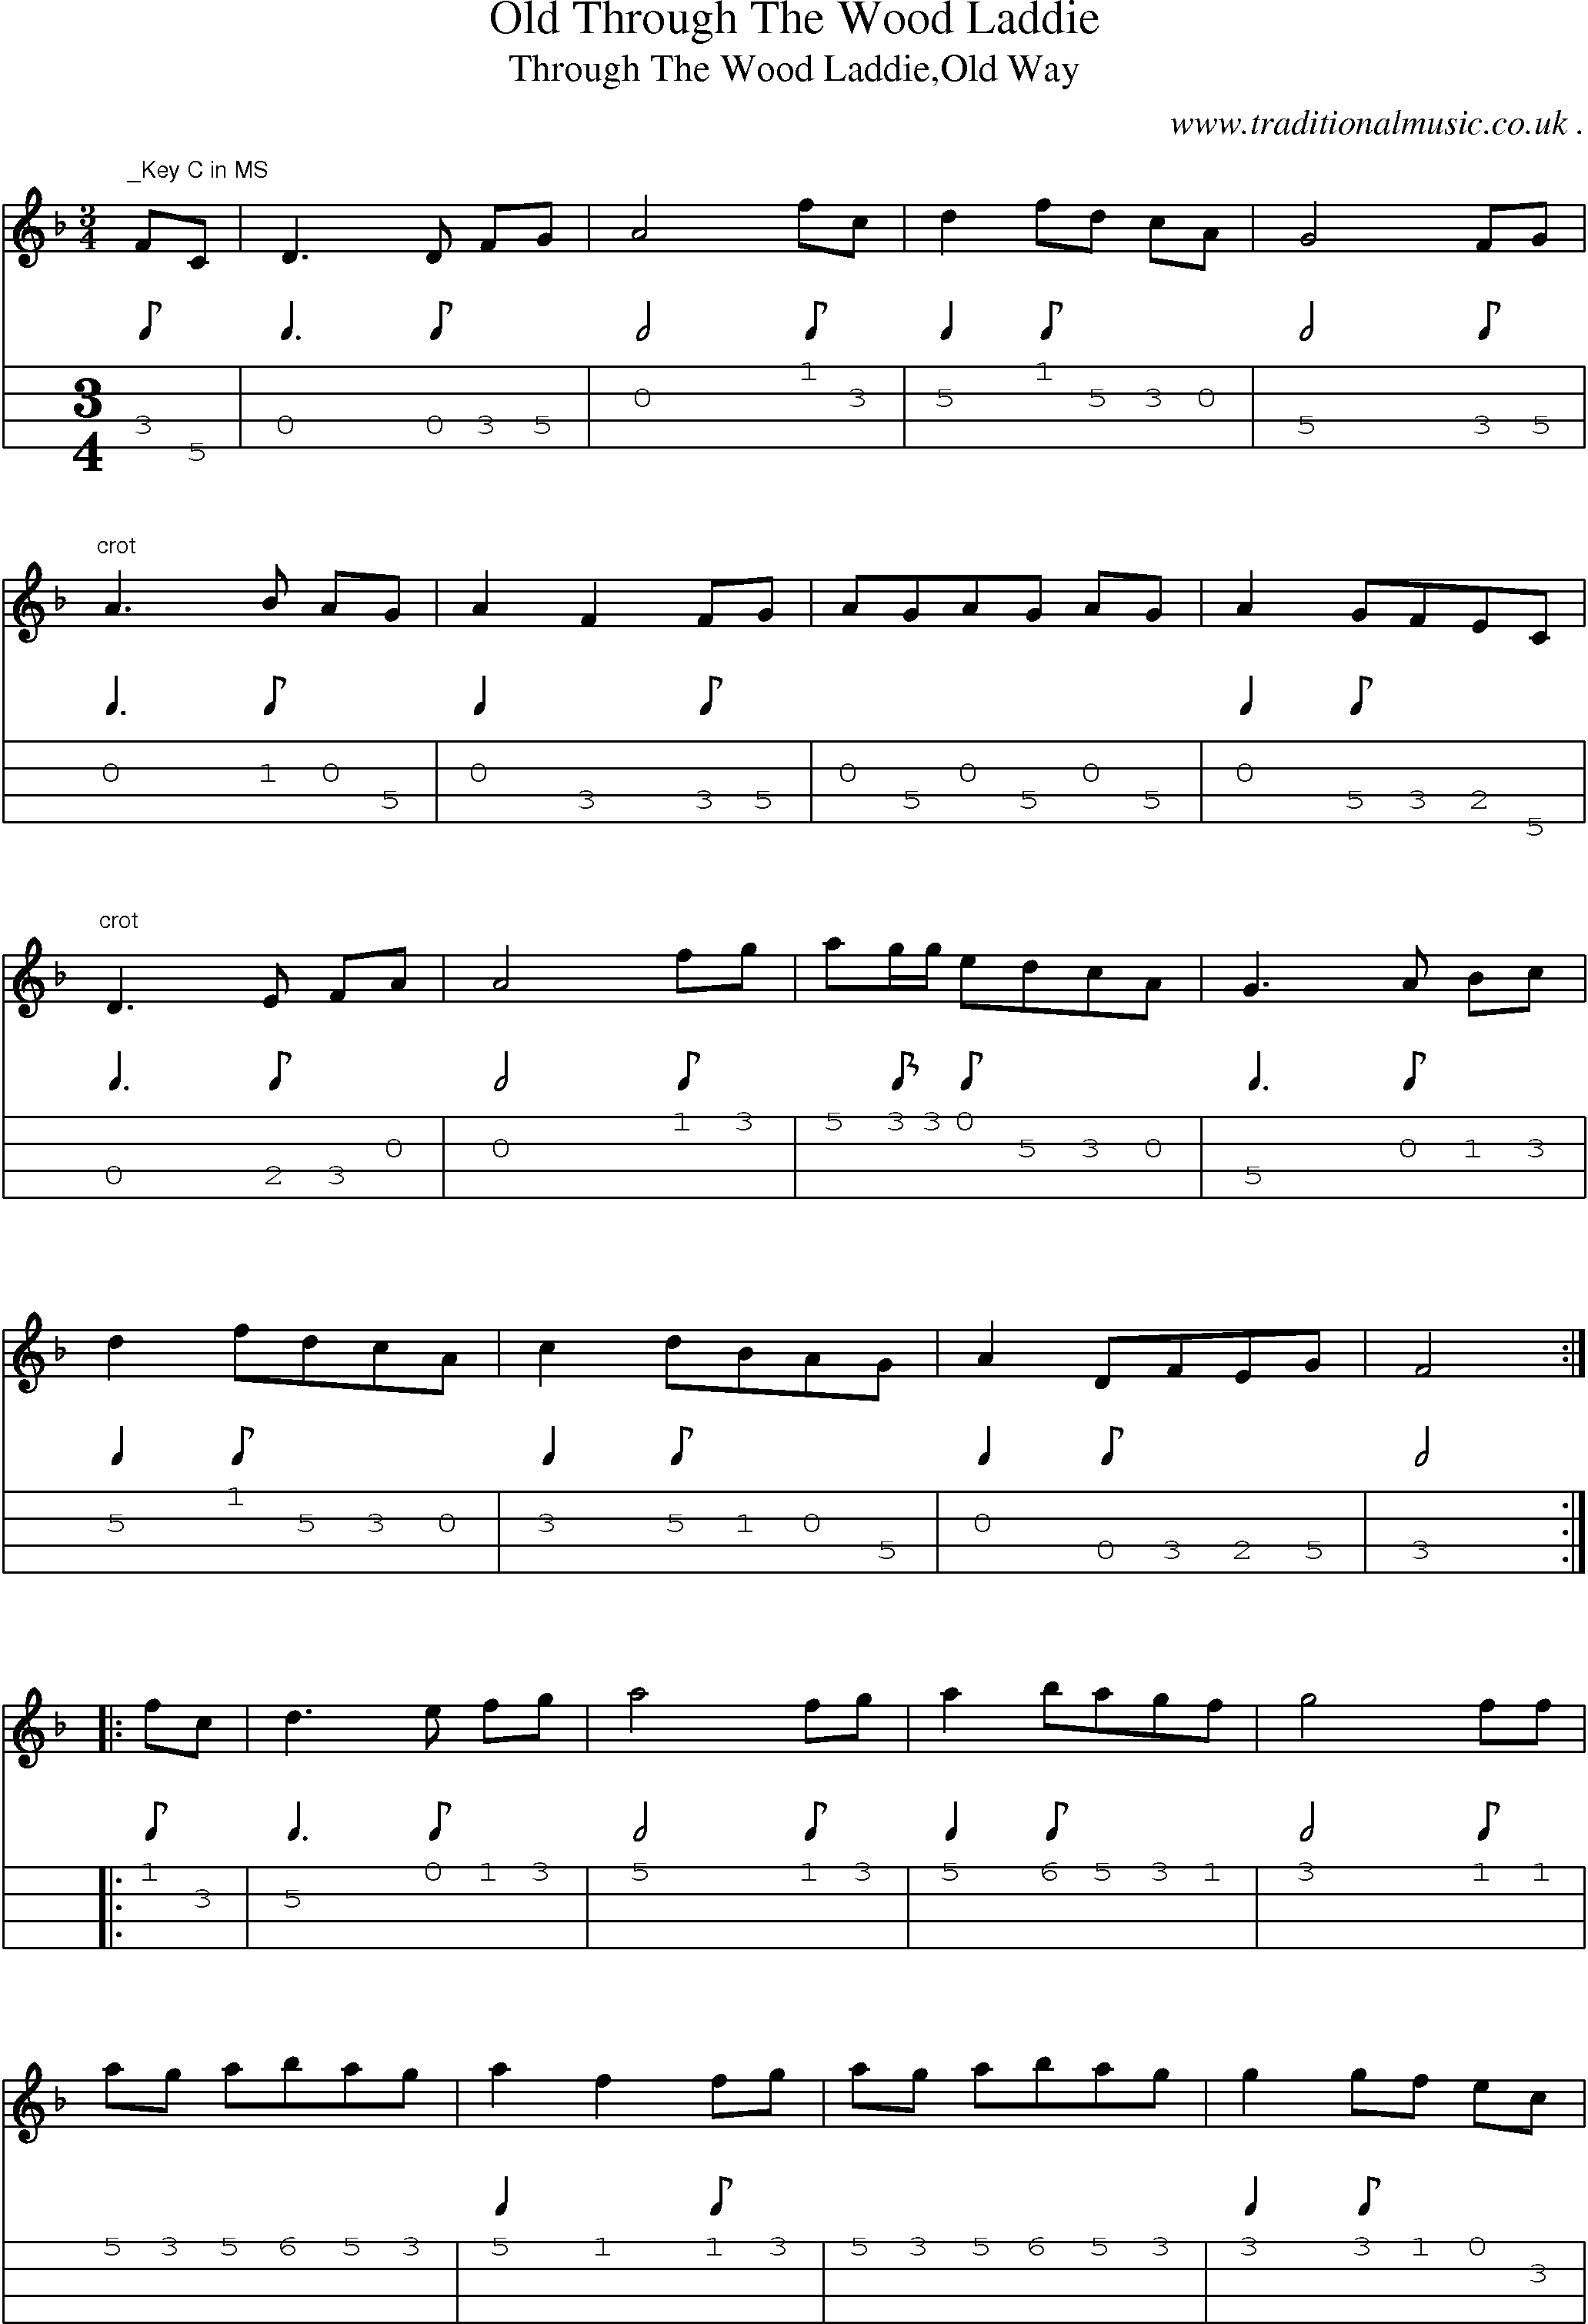 Sheet-Music and Mandolin Tabs for Old Through The Wood Laddie